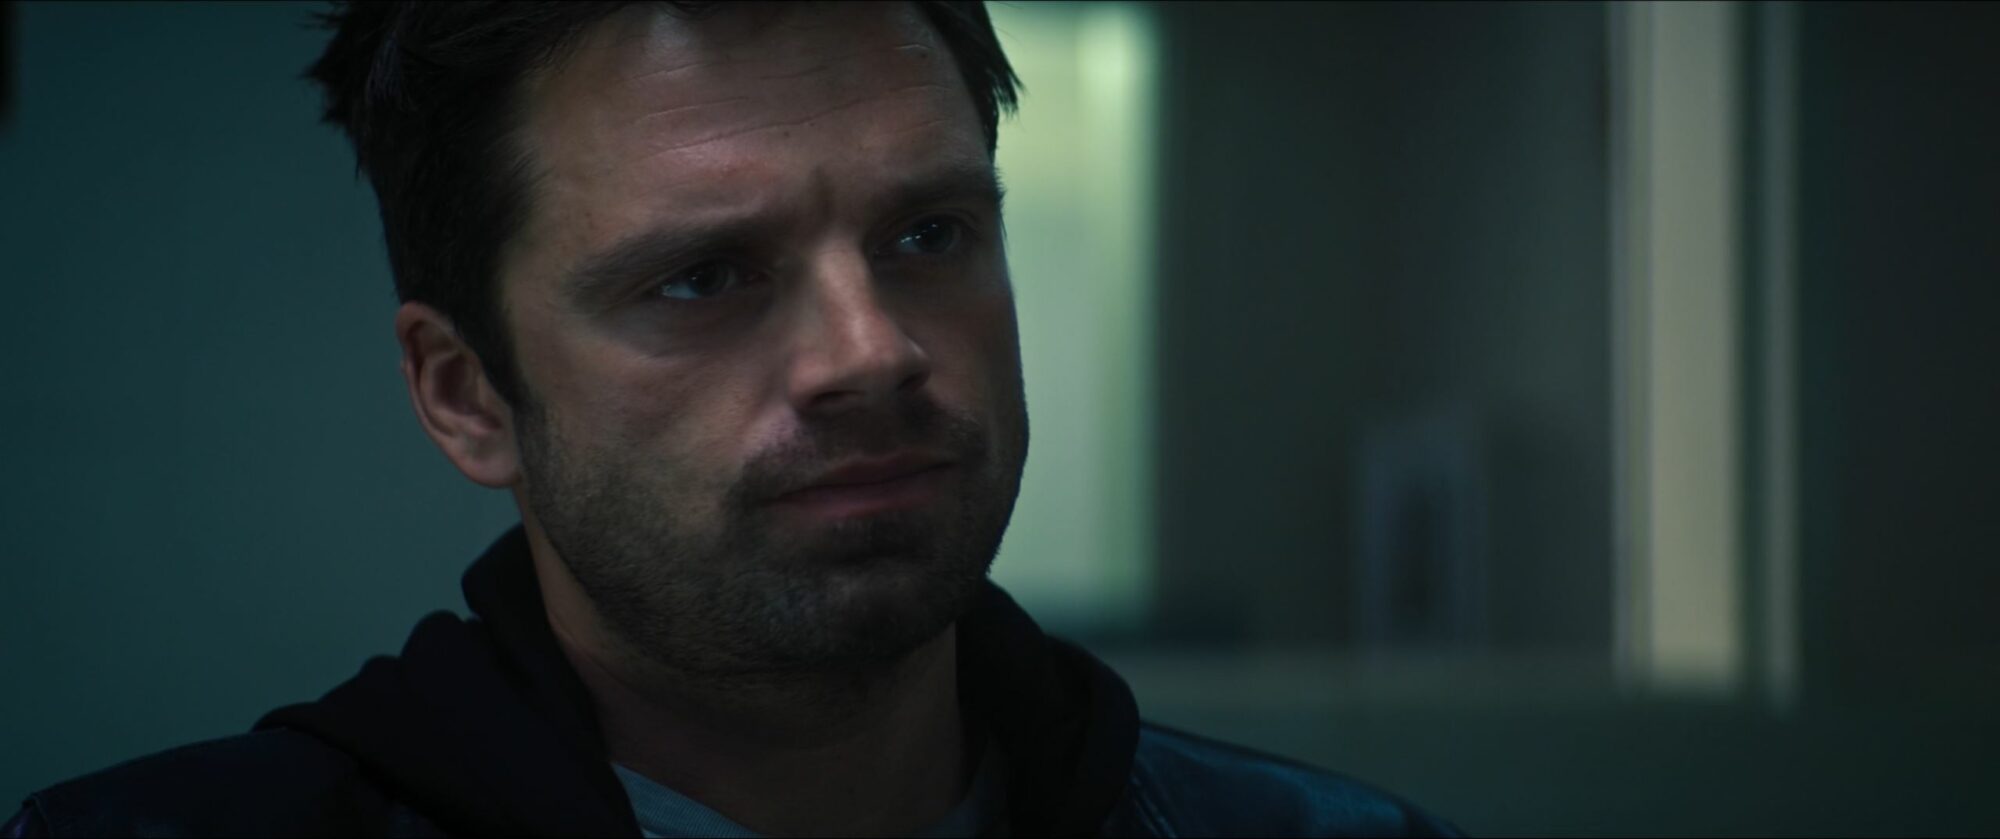 Sebastian Stan as Bucky in The Falcon and the Winter Soldier